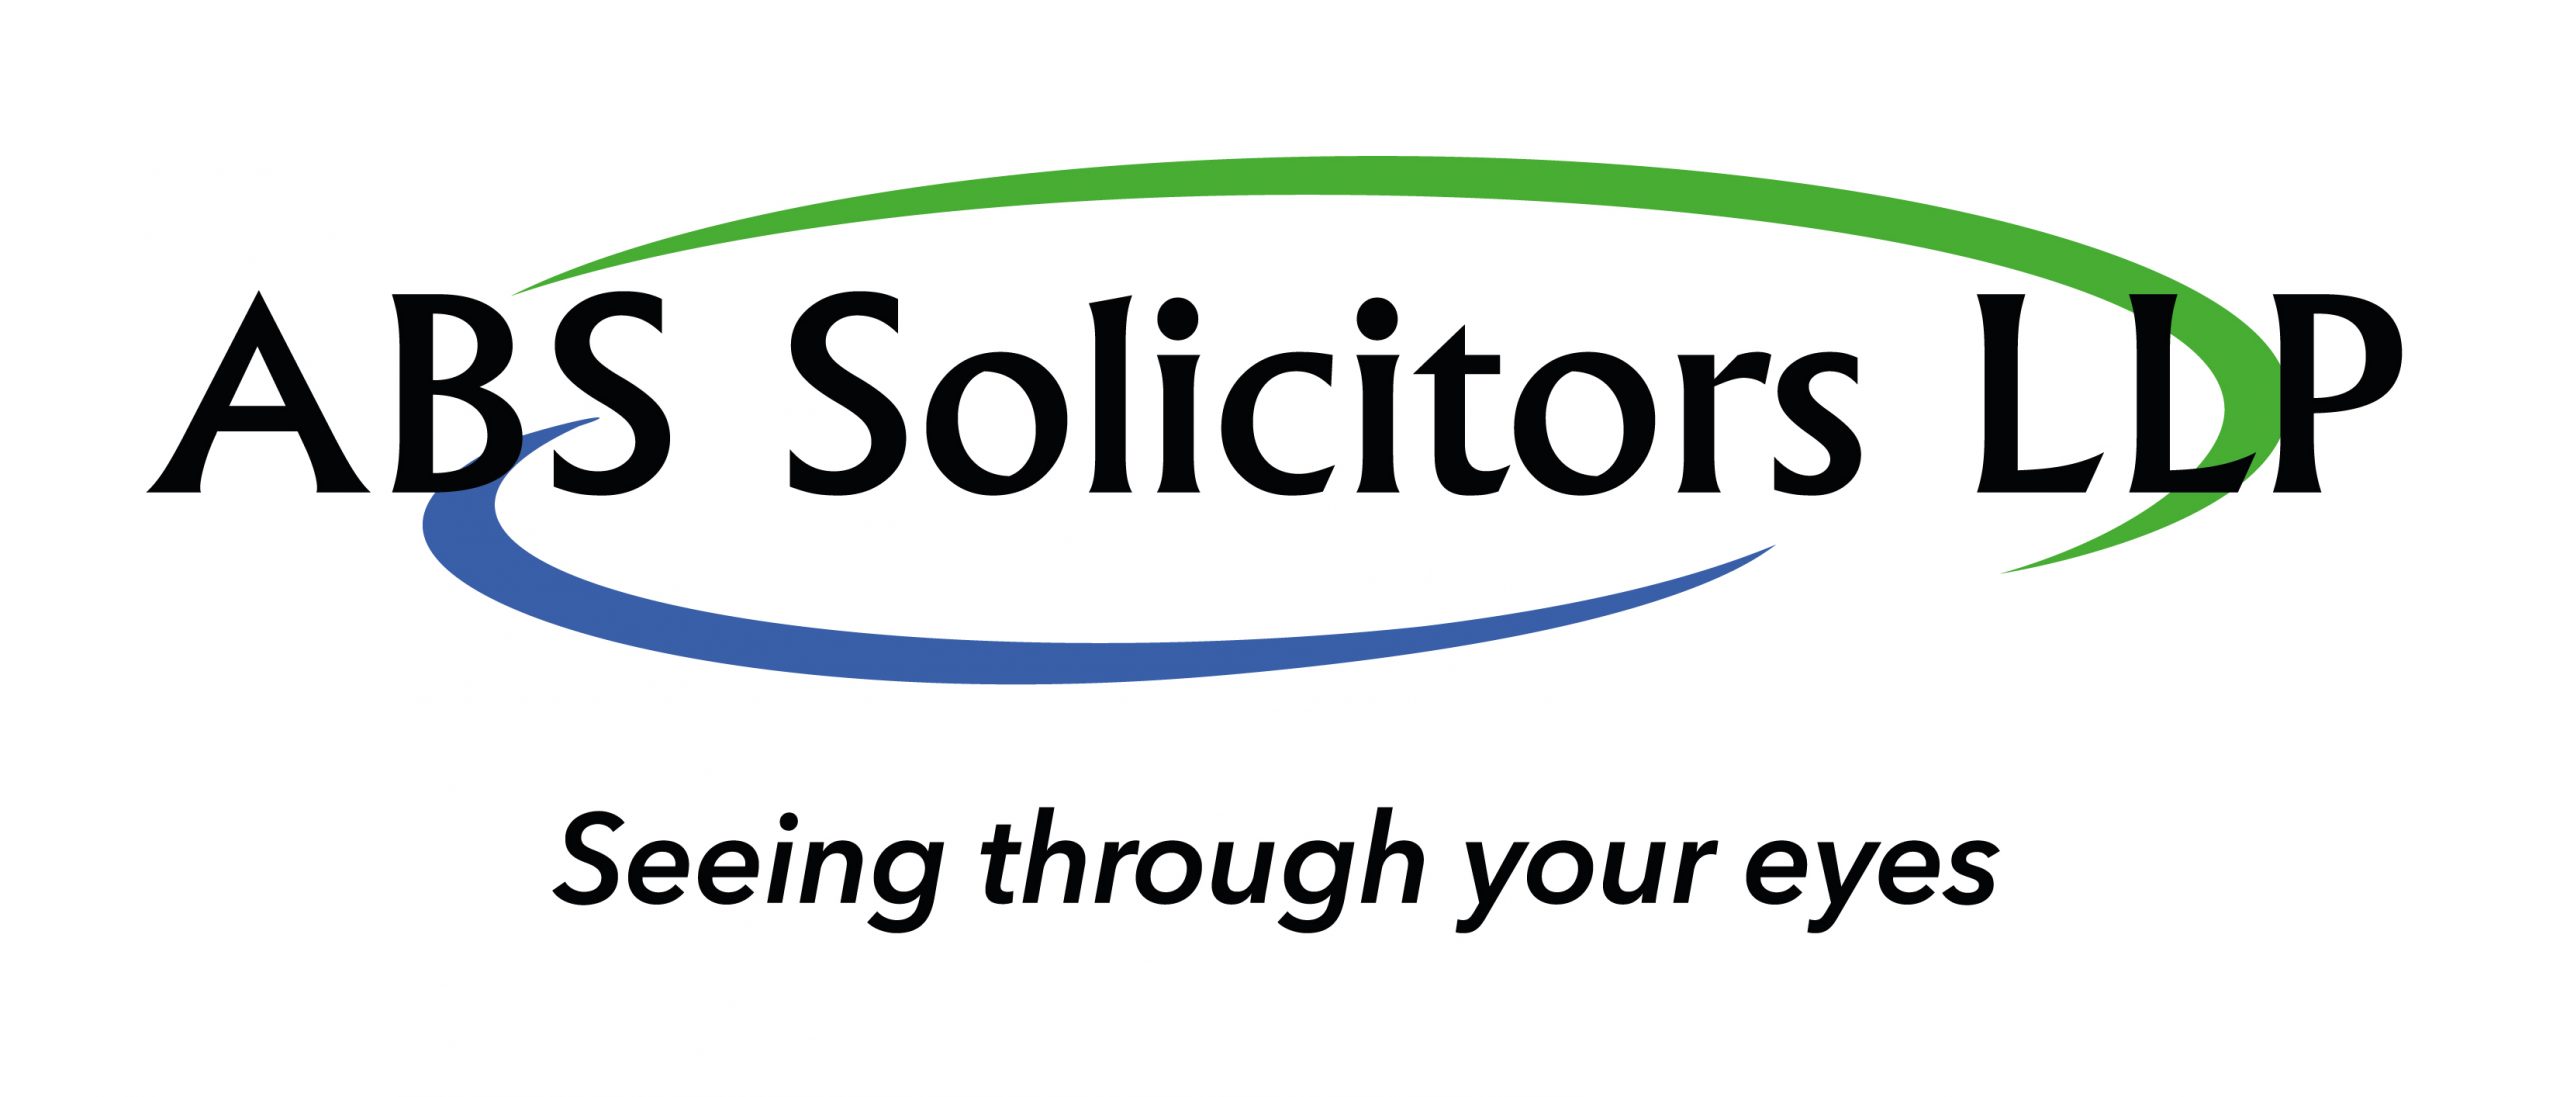 ABS Solicitors LLP